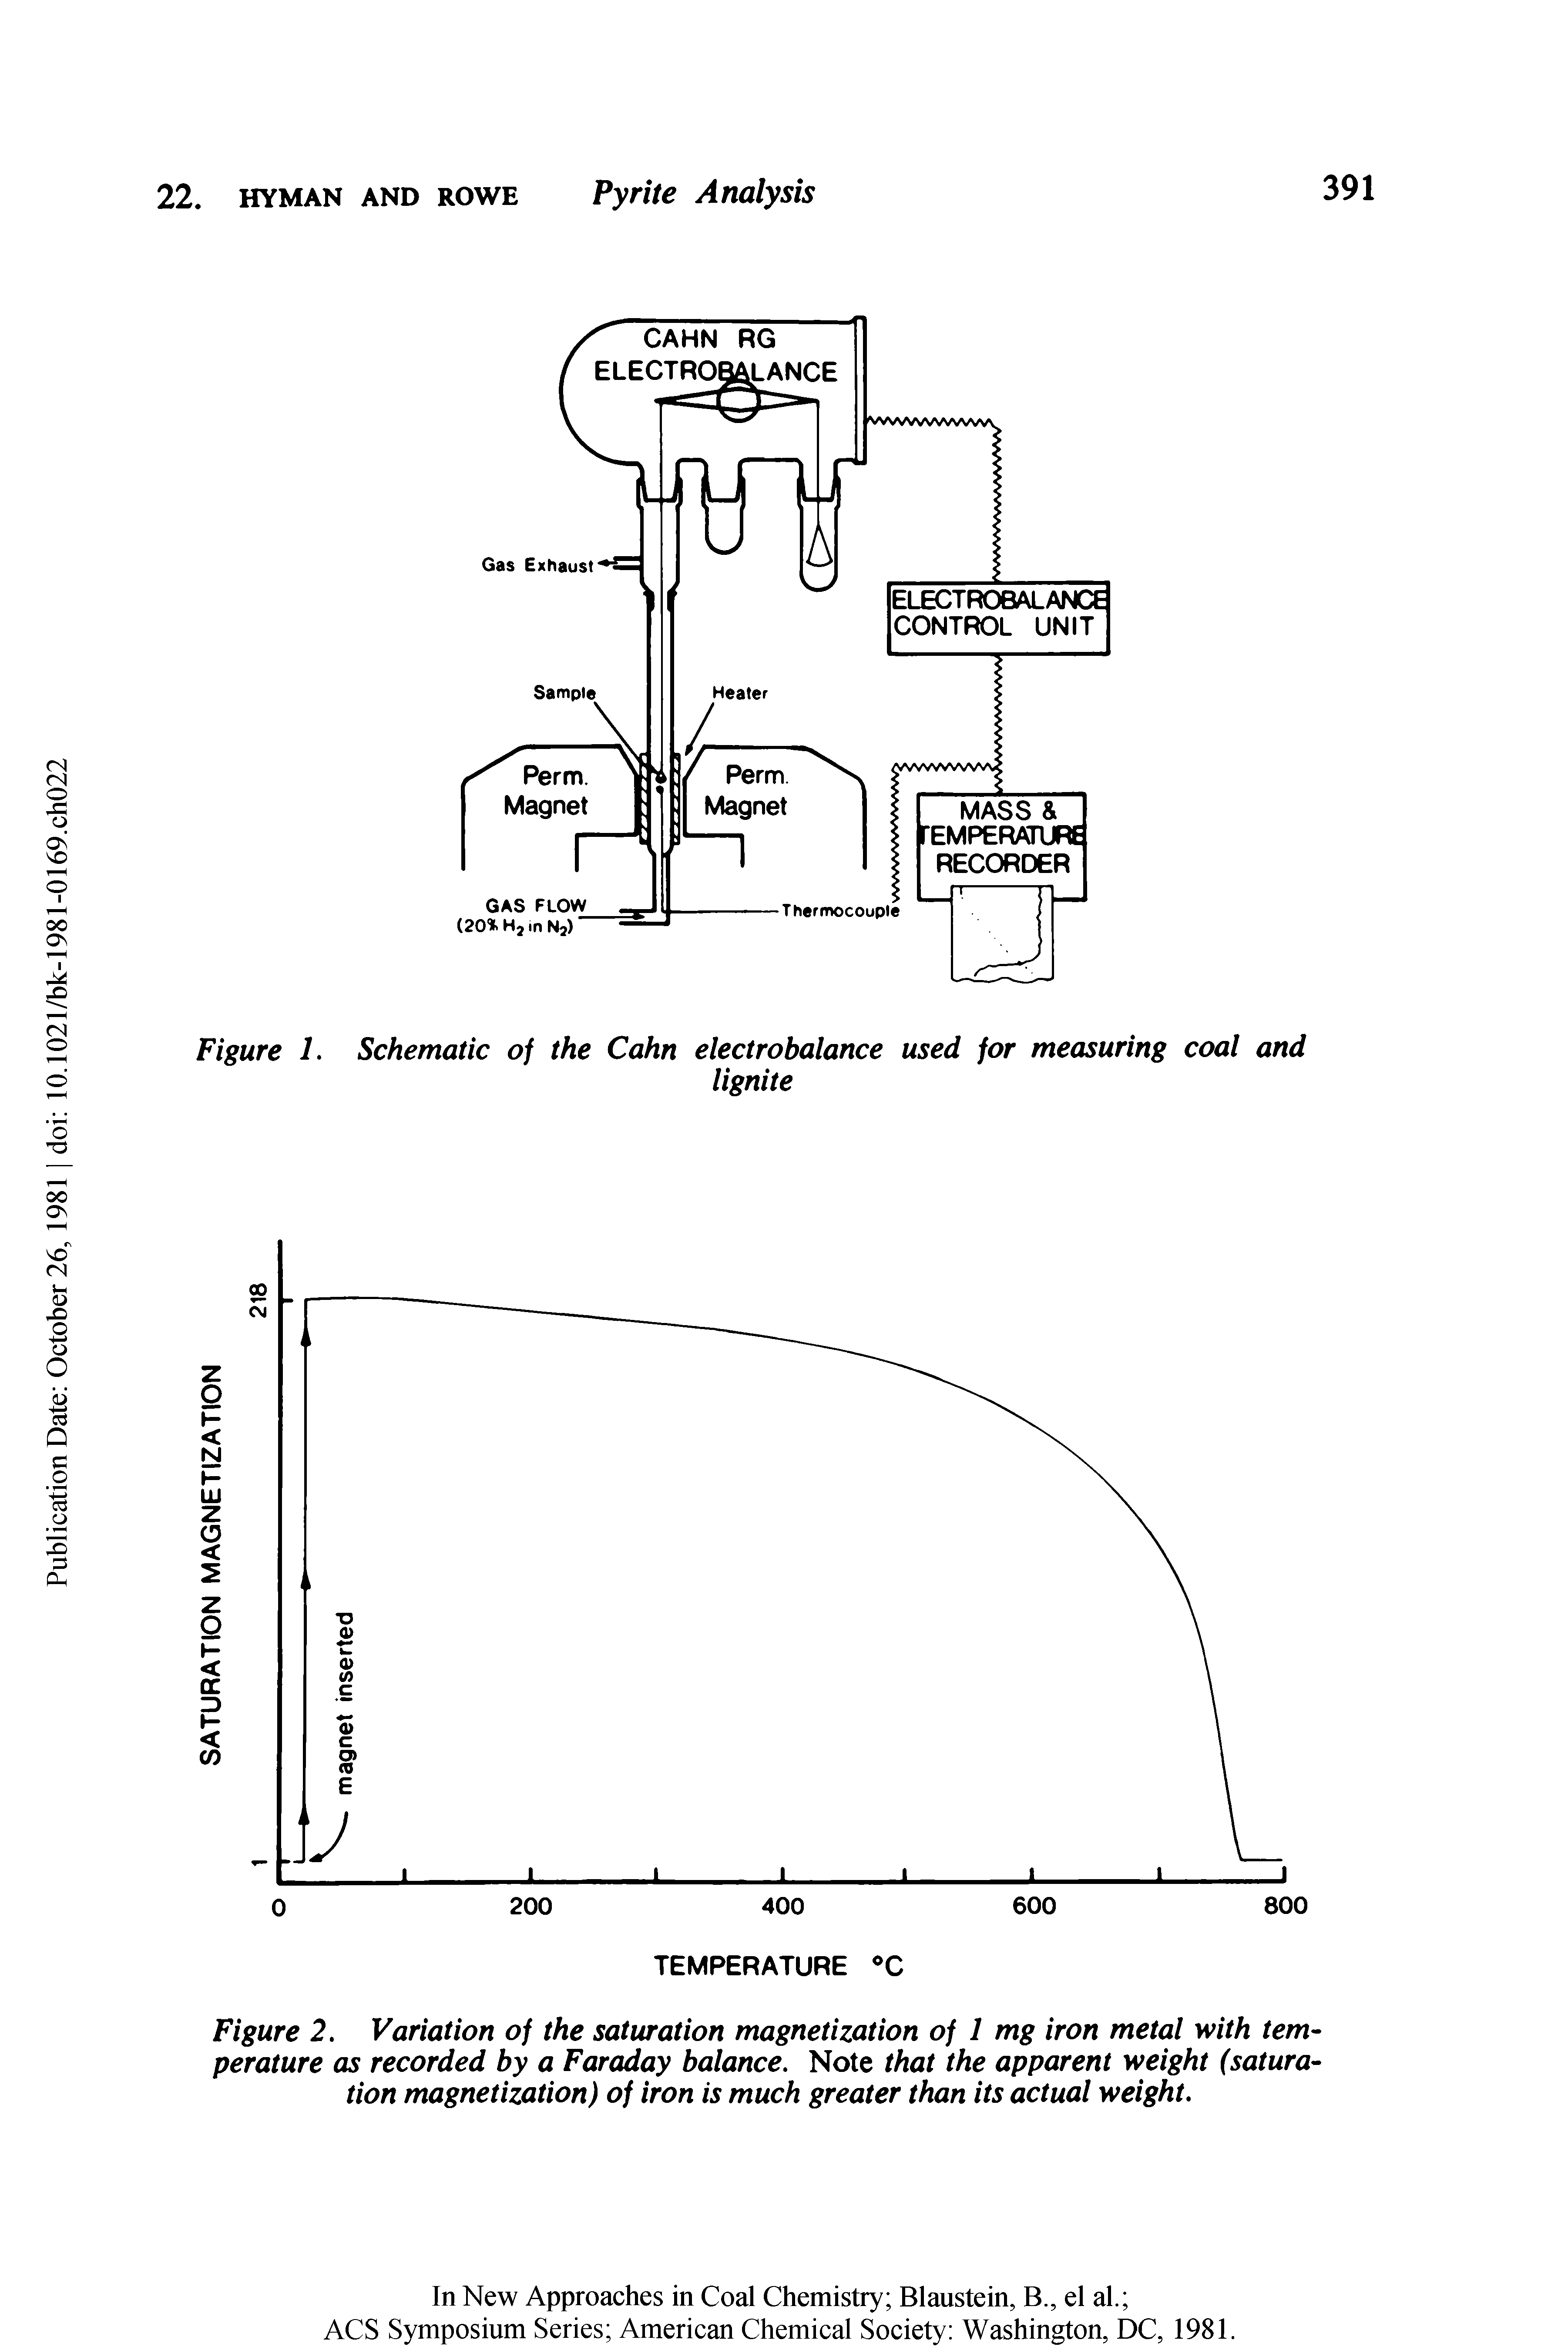 Figure 2. Variation of the saturation magnetization of 1 mg iron metal with tern-perature as recorded by a Faraday balance. Note that the apparent weight (saturation magnetization) of iron is much greater than its actual weight.